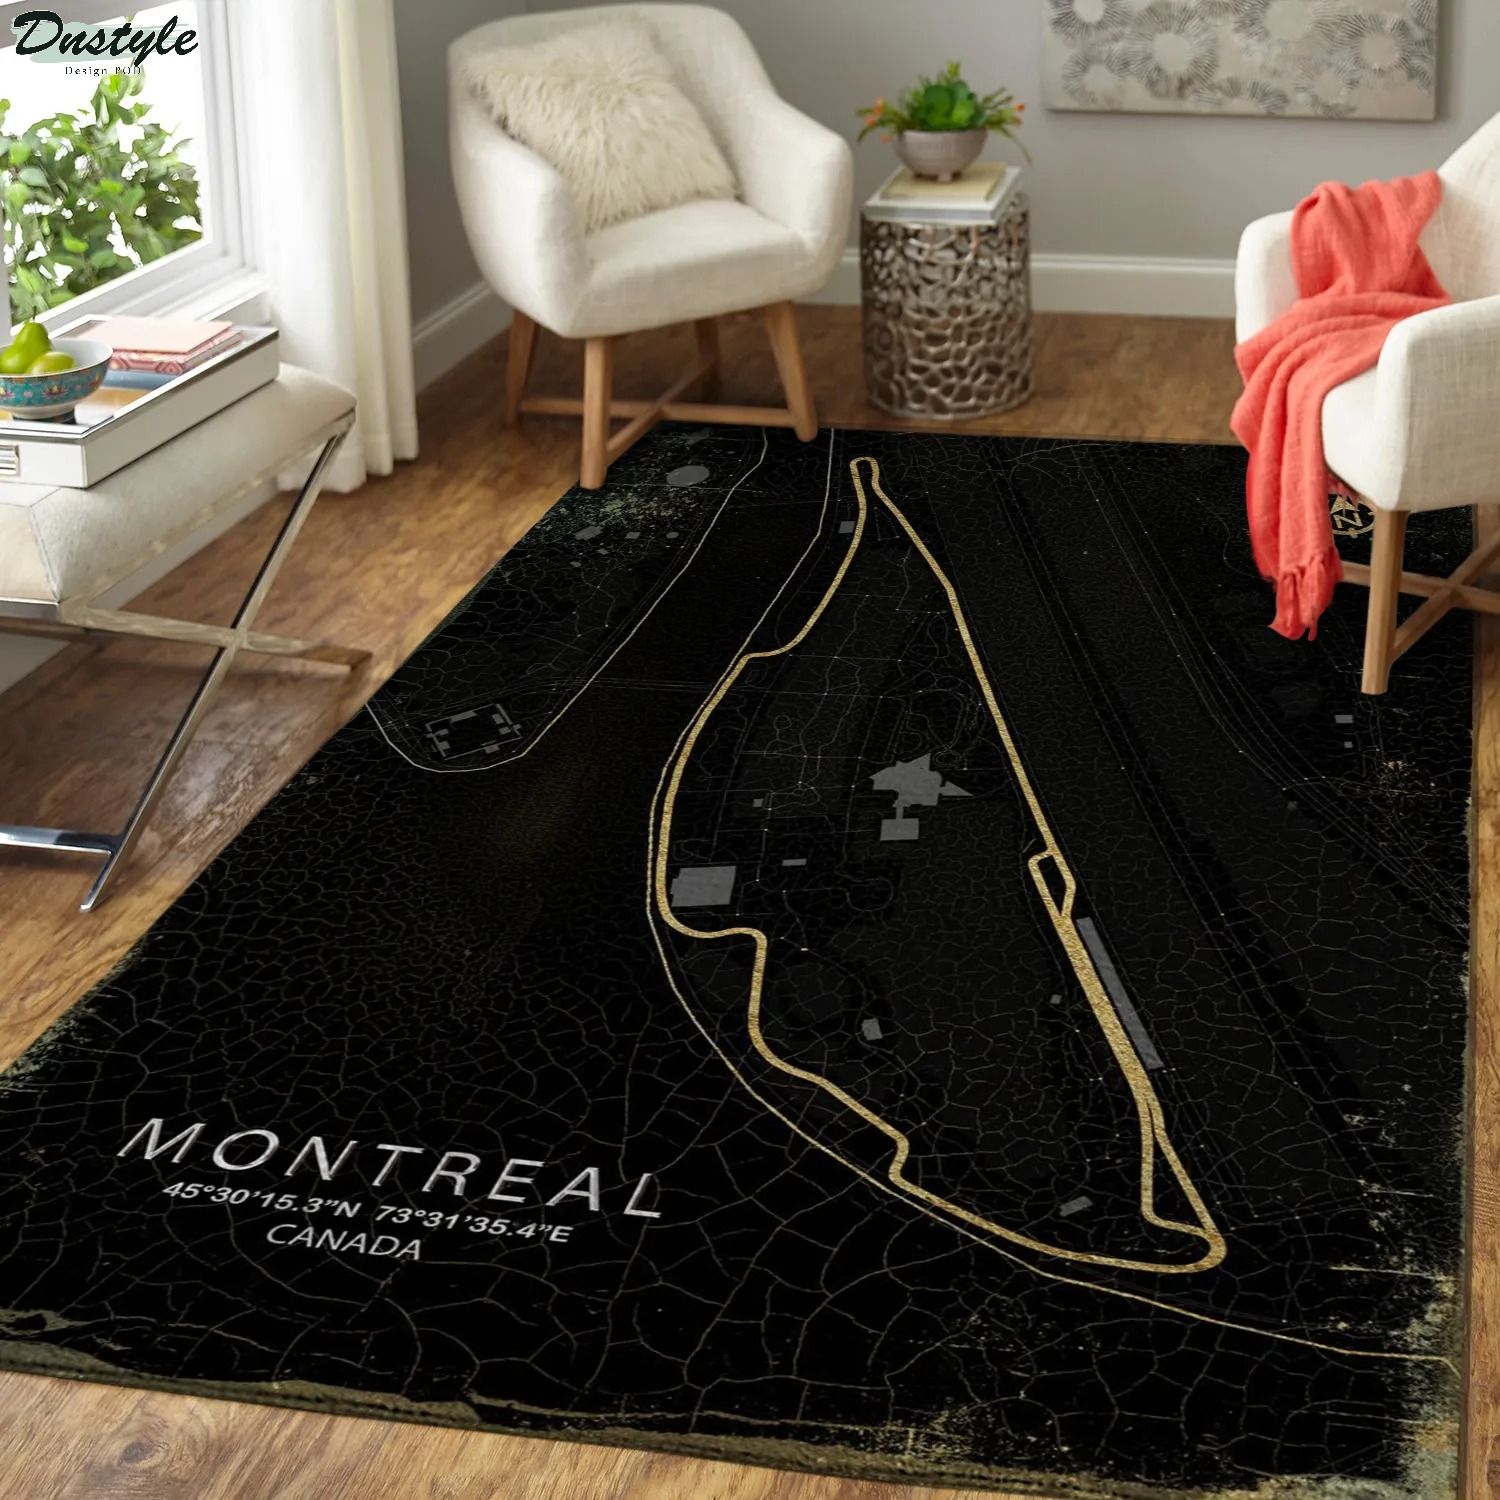 Montreal canada f1 track rug 2